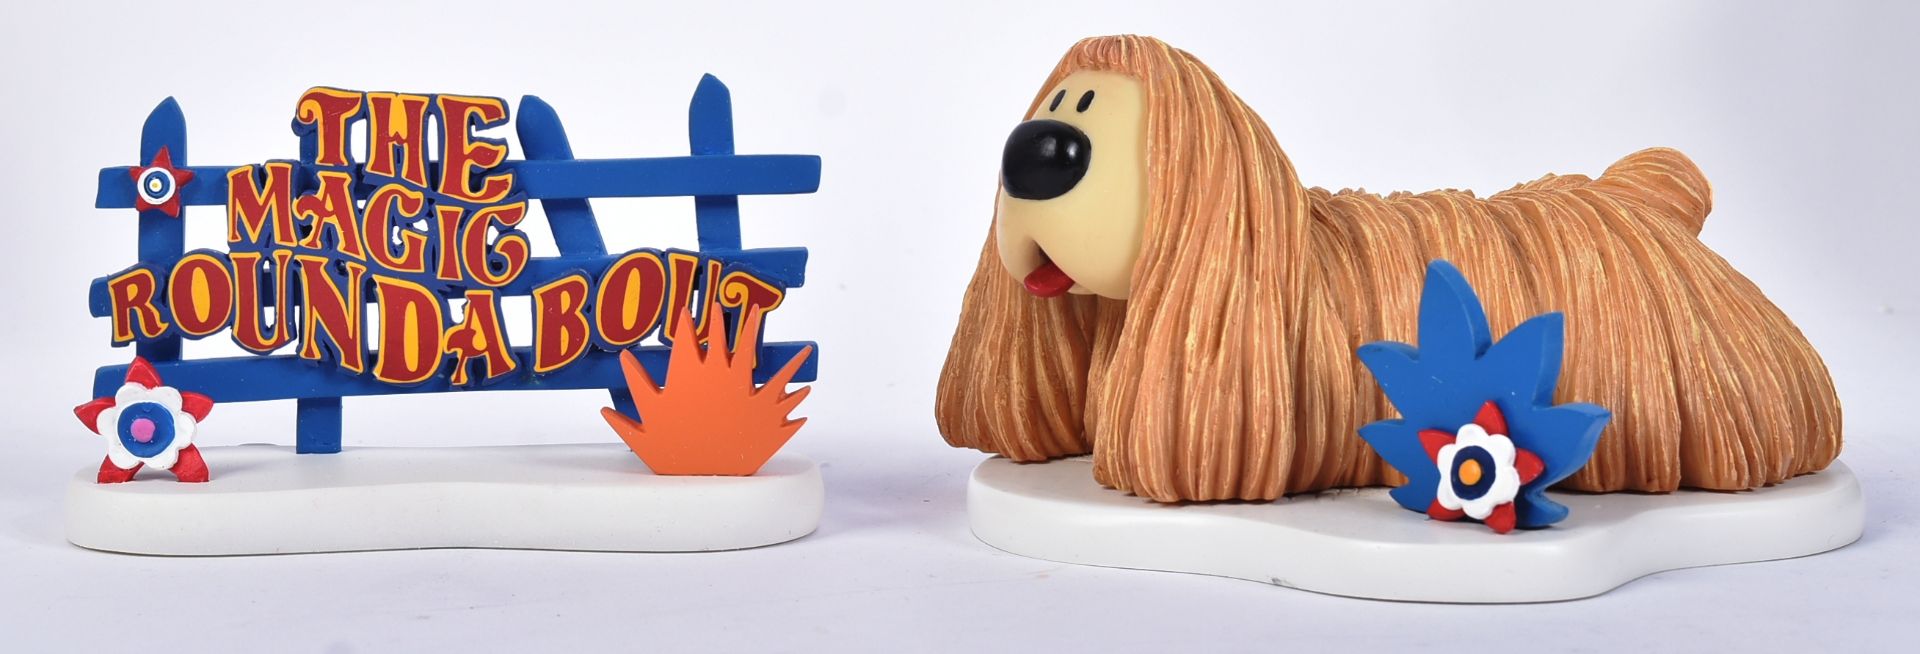 THE MAGIC ROUNDABOUT - ROBERT HARROP - FIGURINES / STATUES - Image 2 of 5